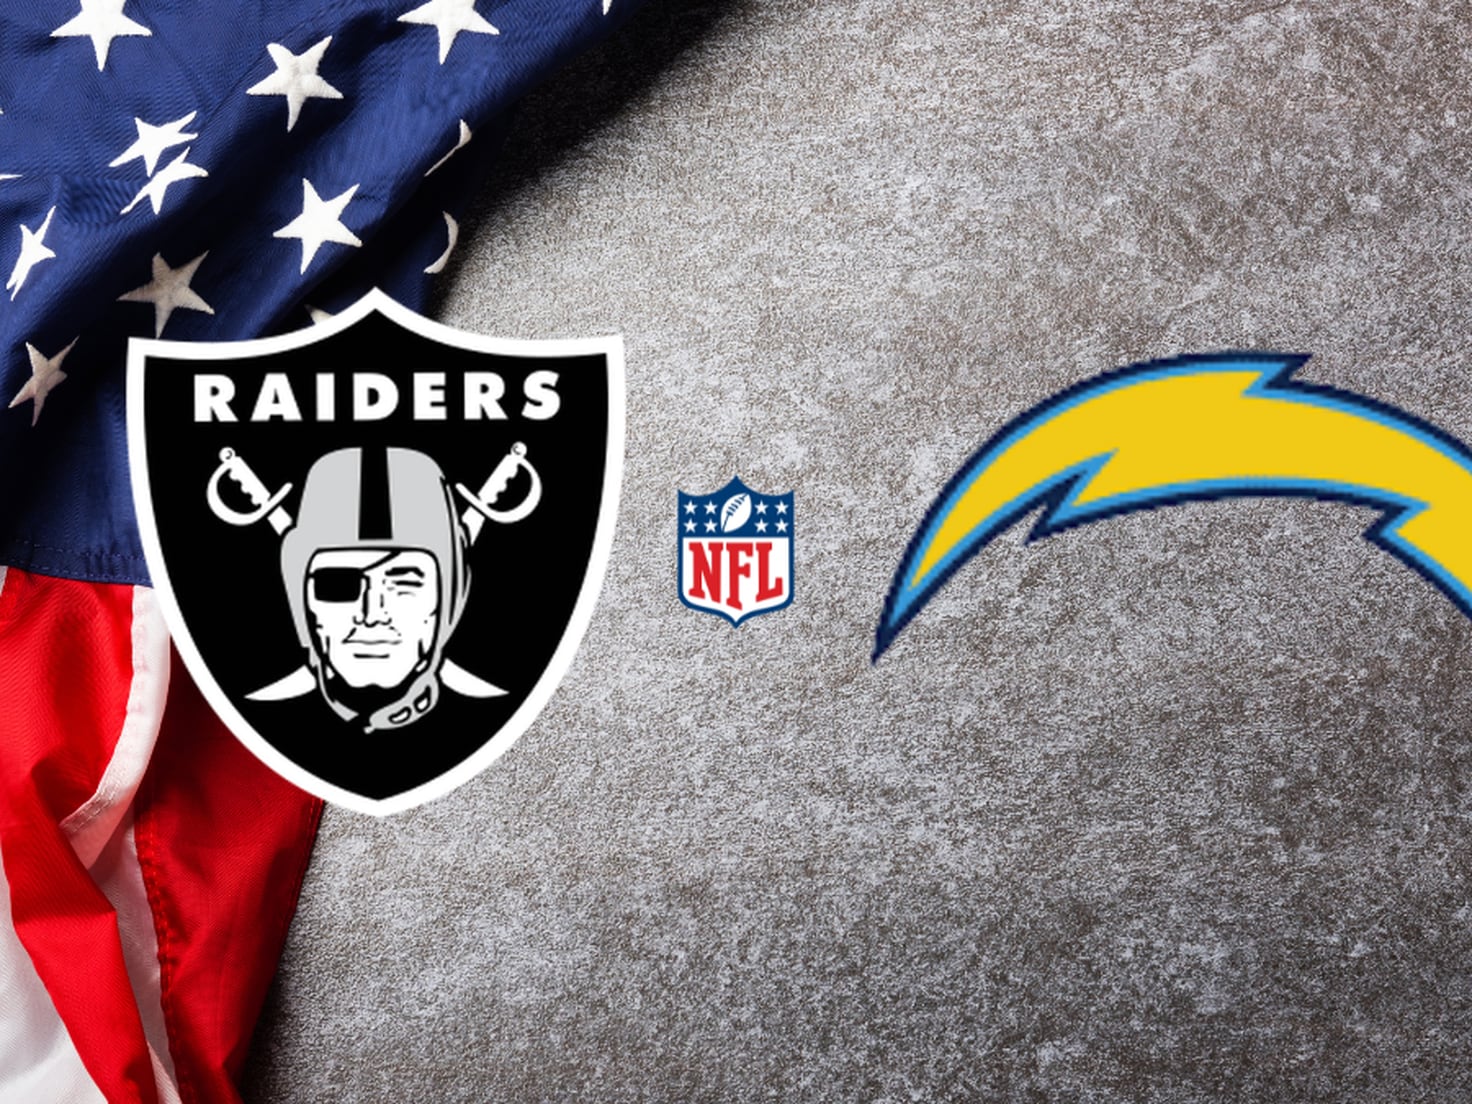 Las Vegas Raiders vs Los Angeles Chargers: times, how to watch on